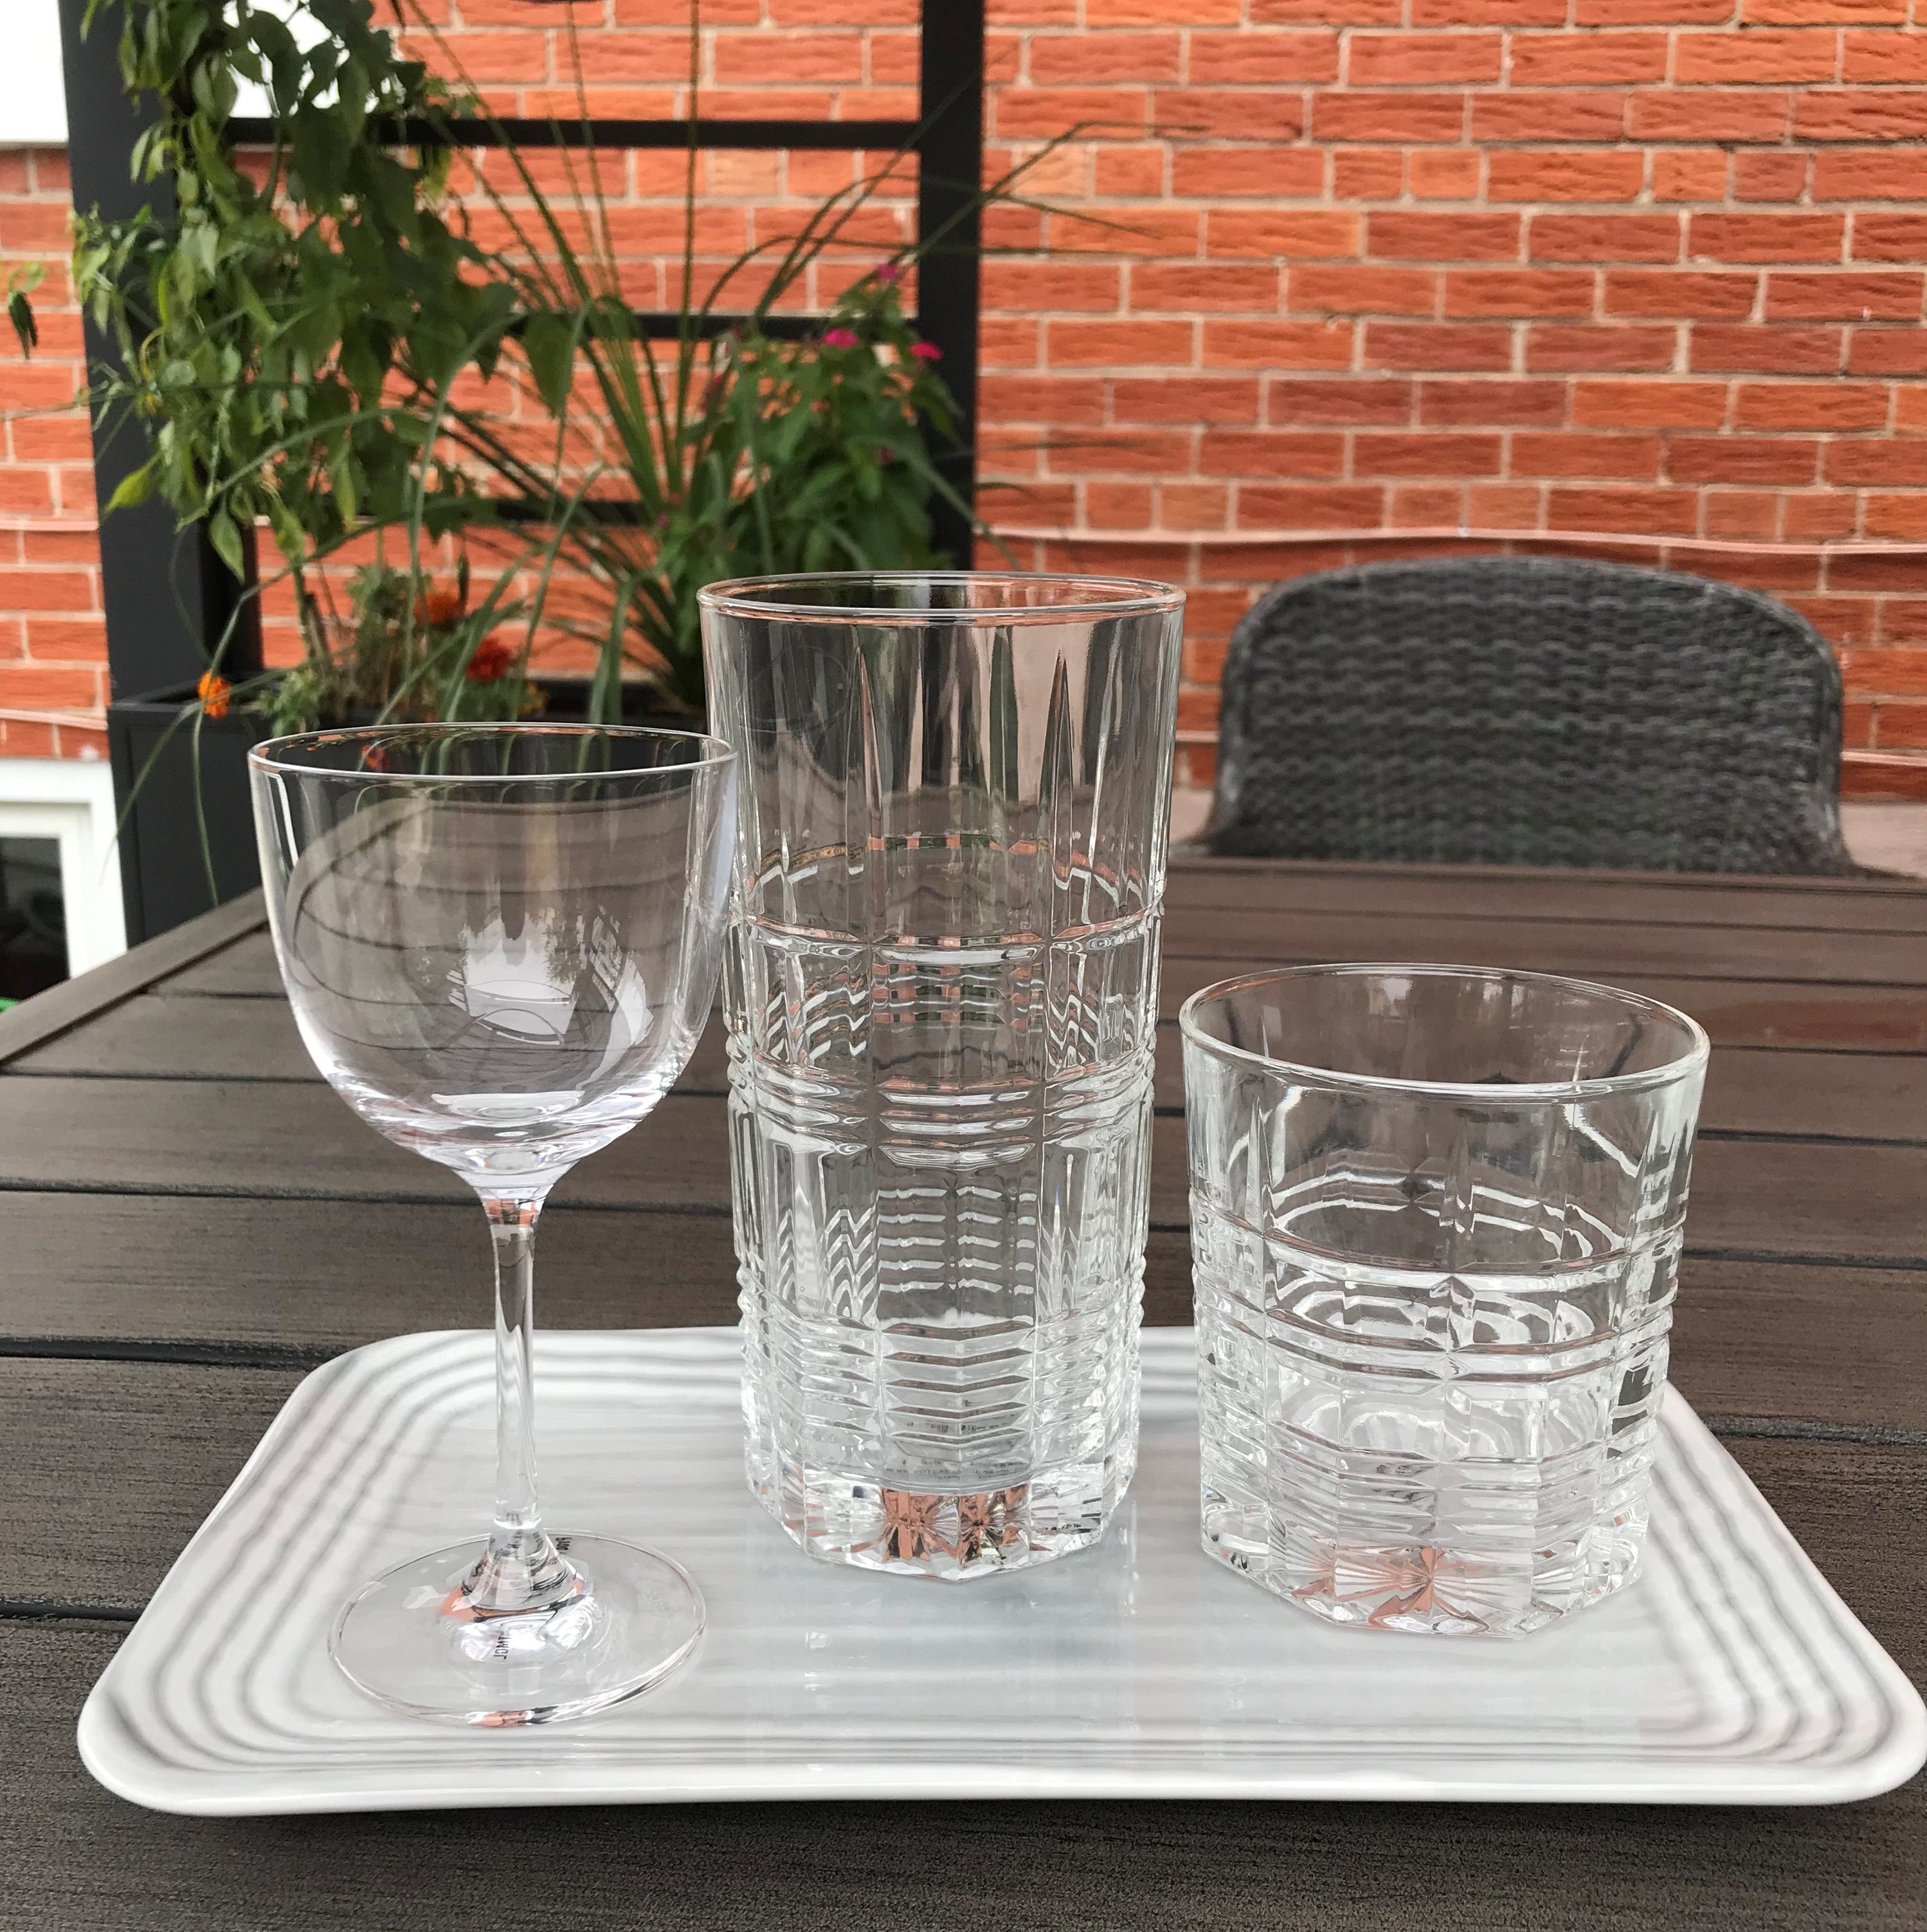 Why Glass & Plateware Matters